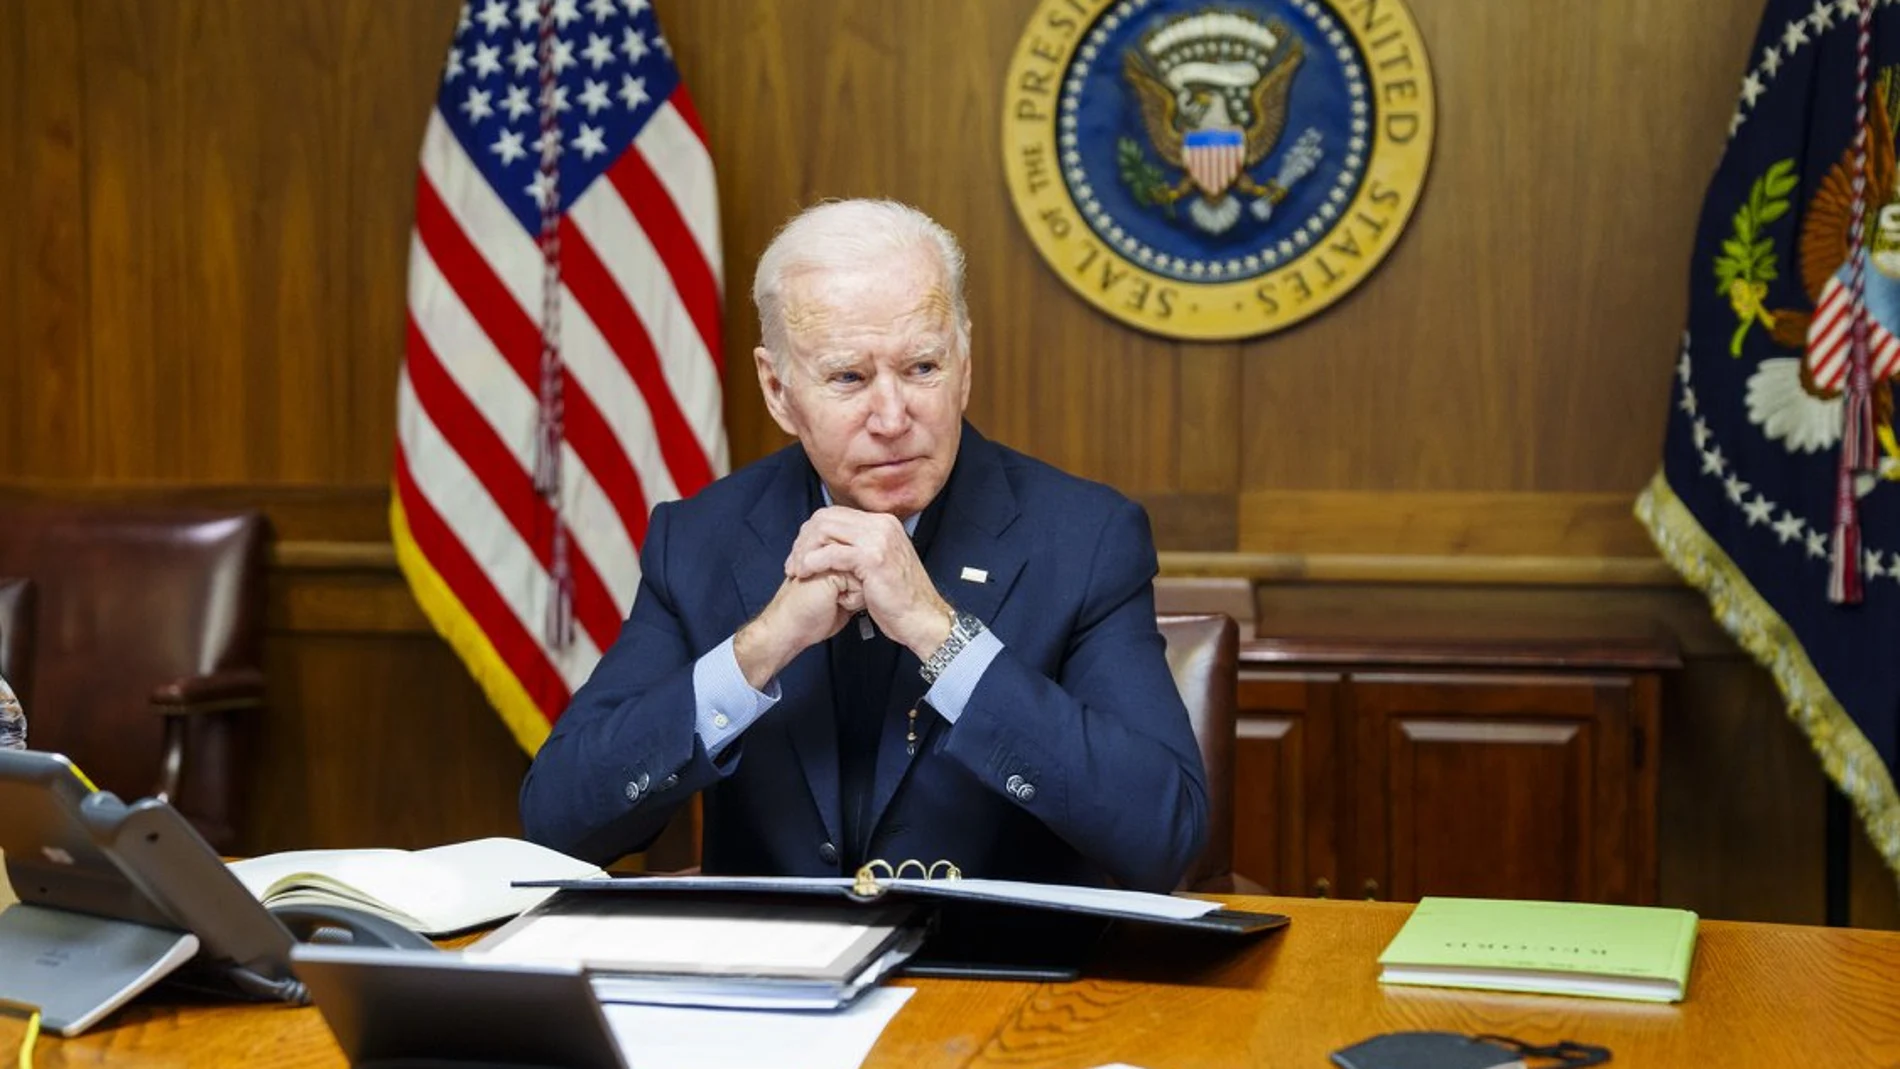 This image provided by The White House via Twitter shows President Joe Biden at Camp David, Md., Saturday, Feb. 12, 2022. Biden on Saturday again called on President Vladimir Putin to pull back more than 100,000 Russian troops massed near Ukraineâ€™s borders and warned that the U.S. and its allies would â€œrespond decisively and impose swift and severe costsâ€ if Russia invades, according to the White House. (The White House via AP)